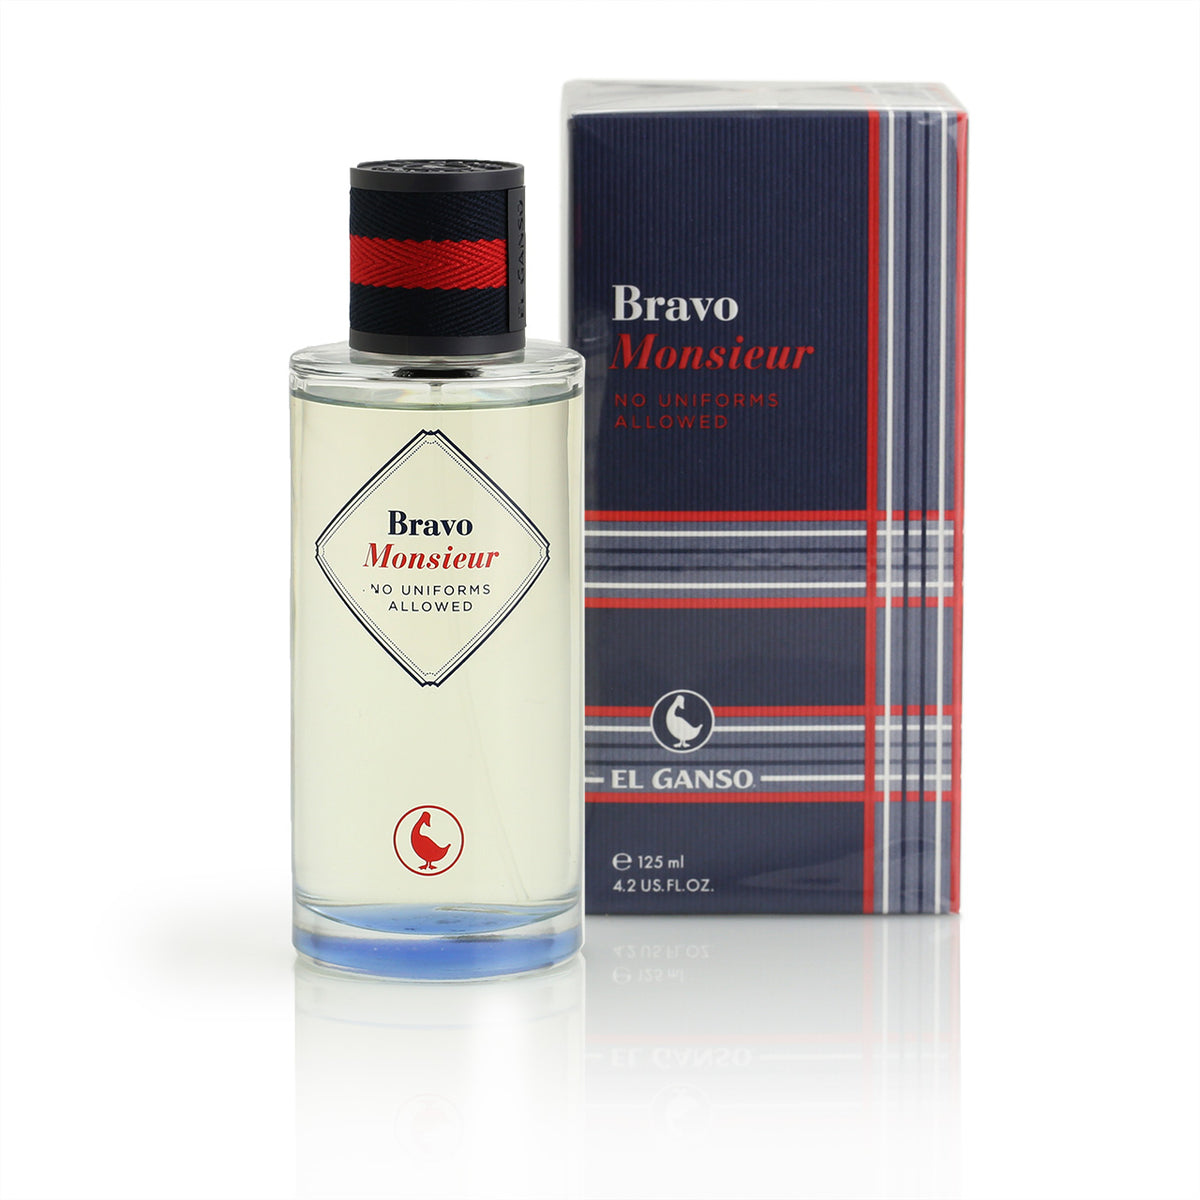 Bravo Monsieu EDT bottle with it&#39;s check-patterned packaging